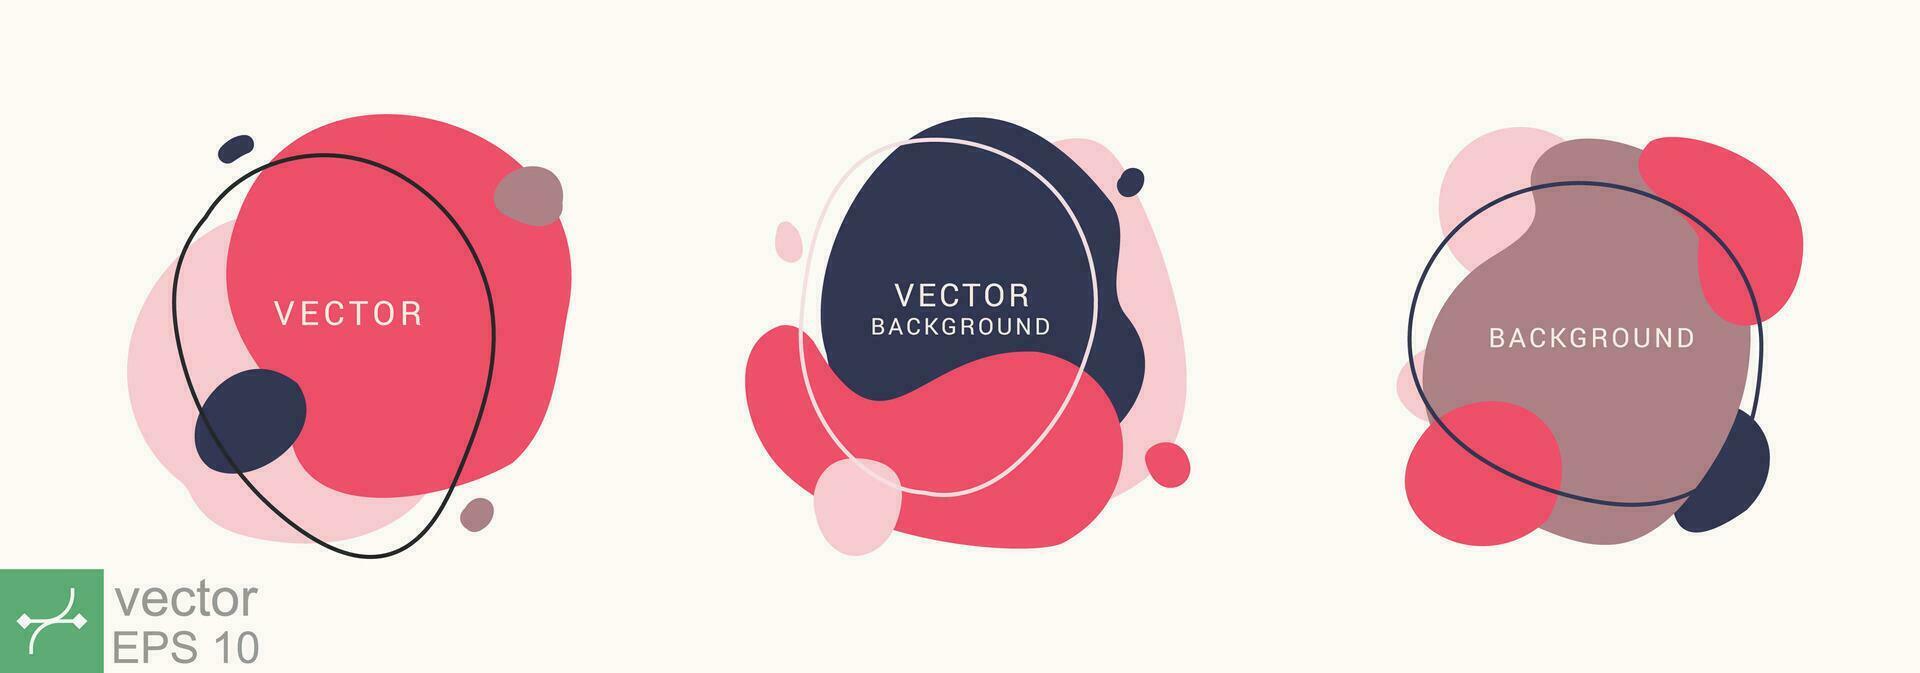 Abstract creative backgrounds in minimal trendy style. Blob abstract shape organic banner, social media story design template in flat style. Vector fluid round shape liquid amoeba. EPS 10.